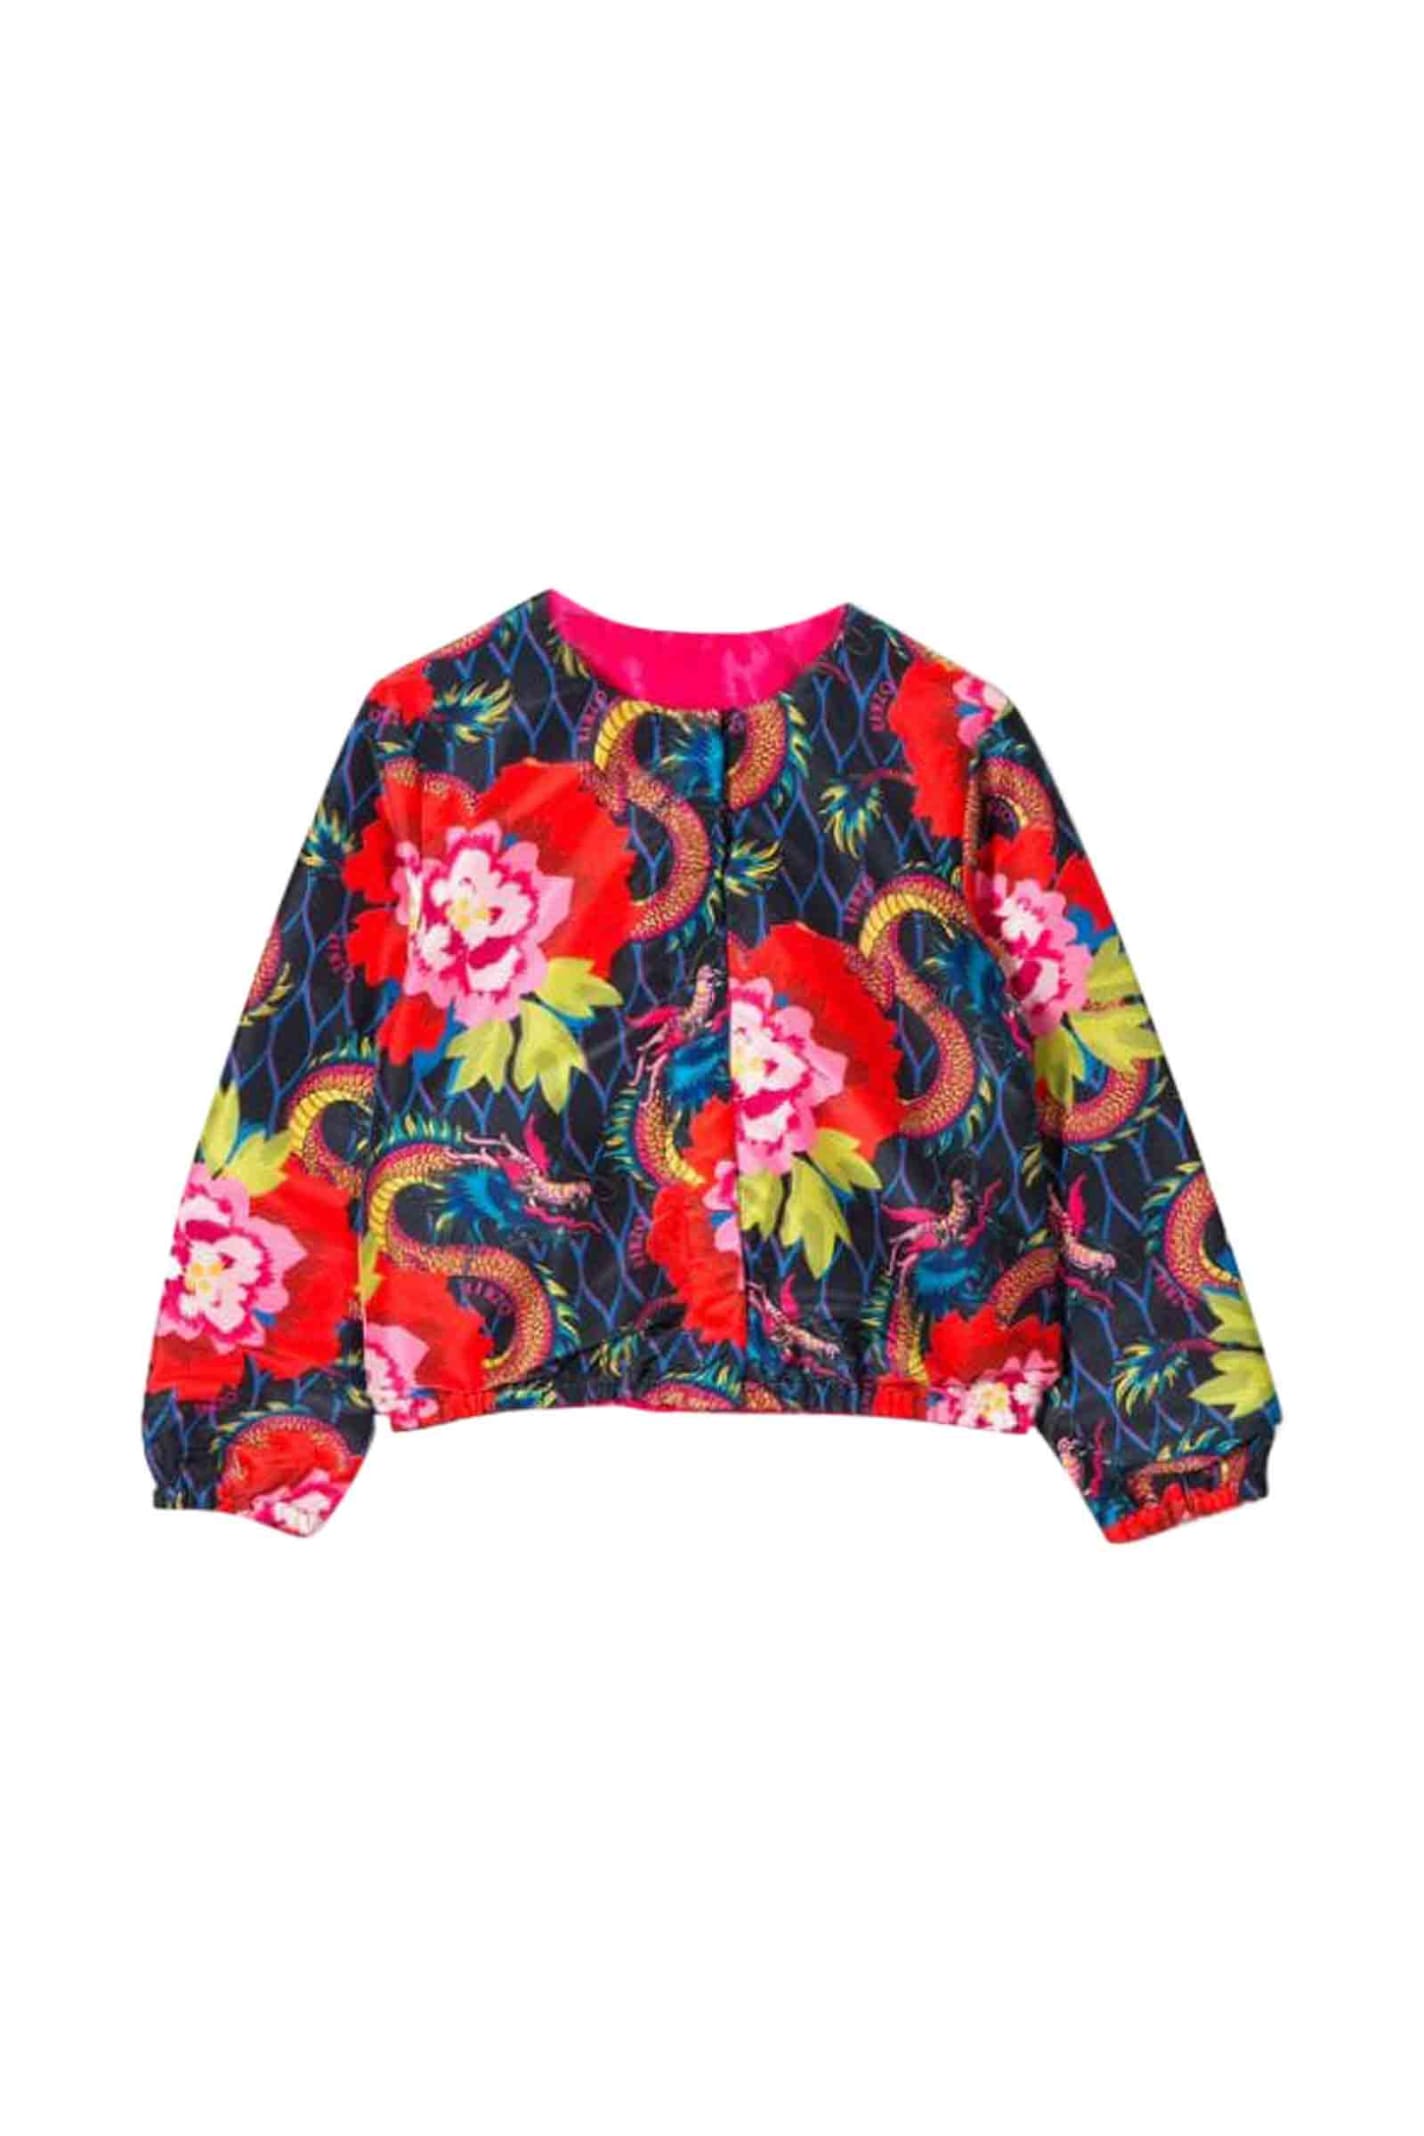 kenzo floral